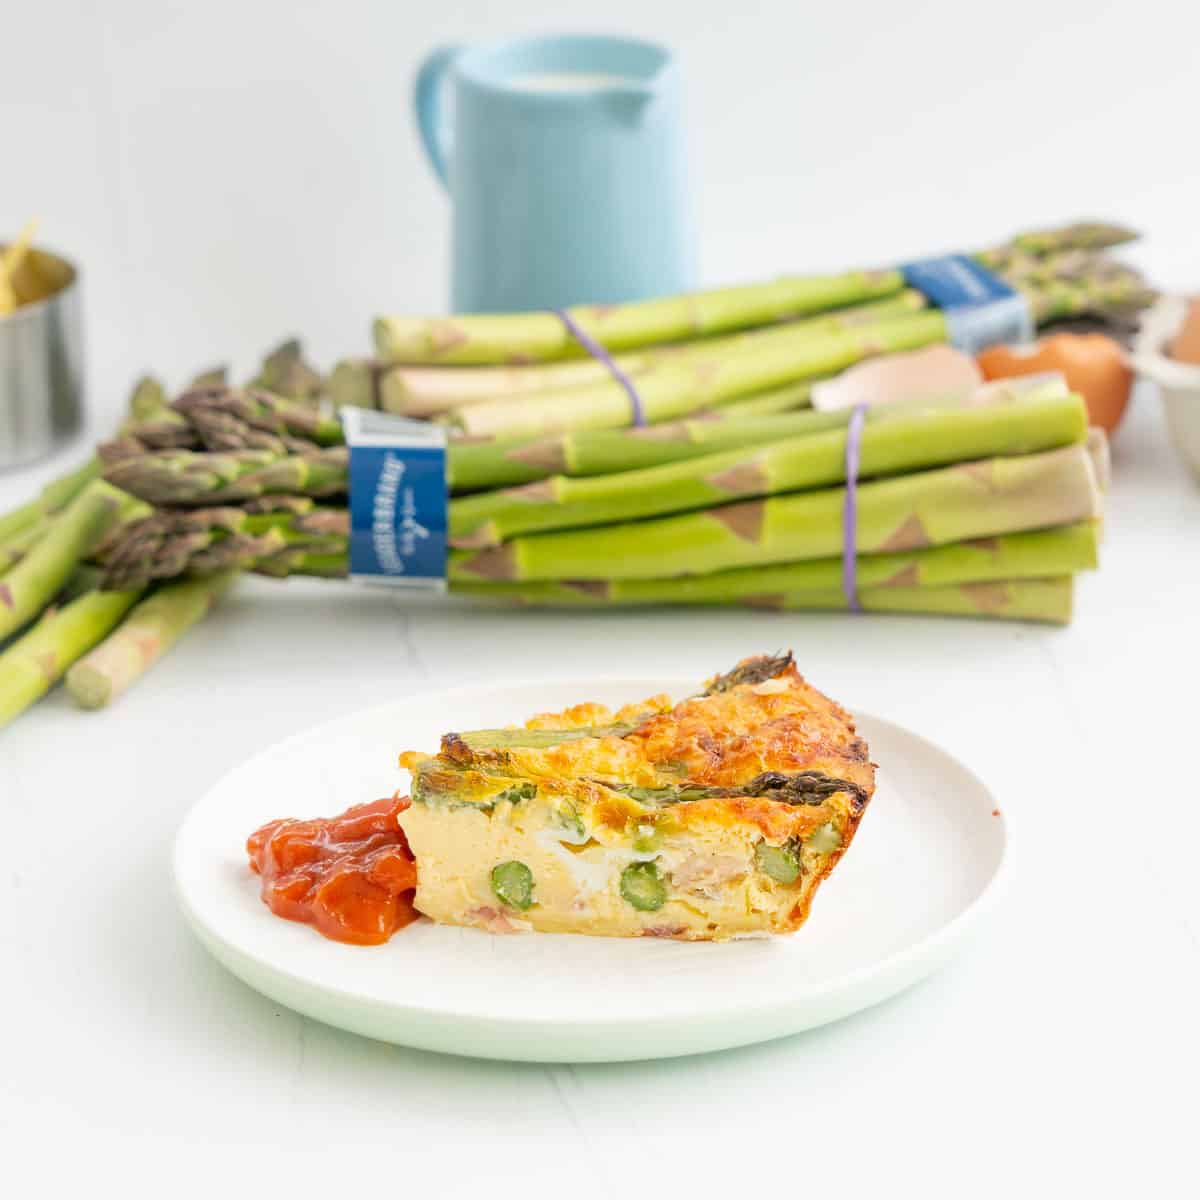 A slice of asparagus quiche on a white plate garnished with tomato relish, bunches of asparagus in the background.